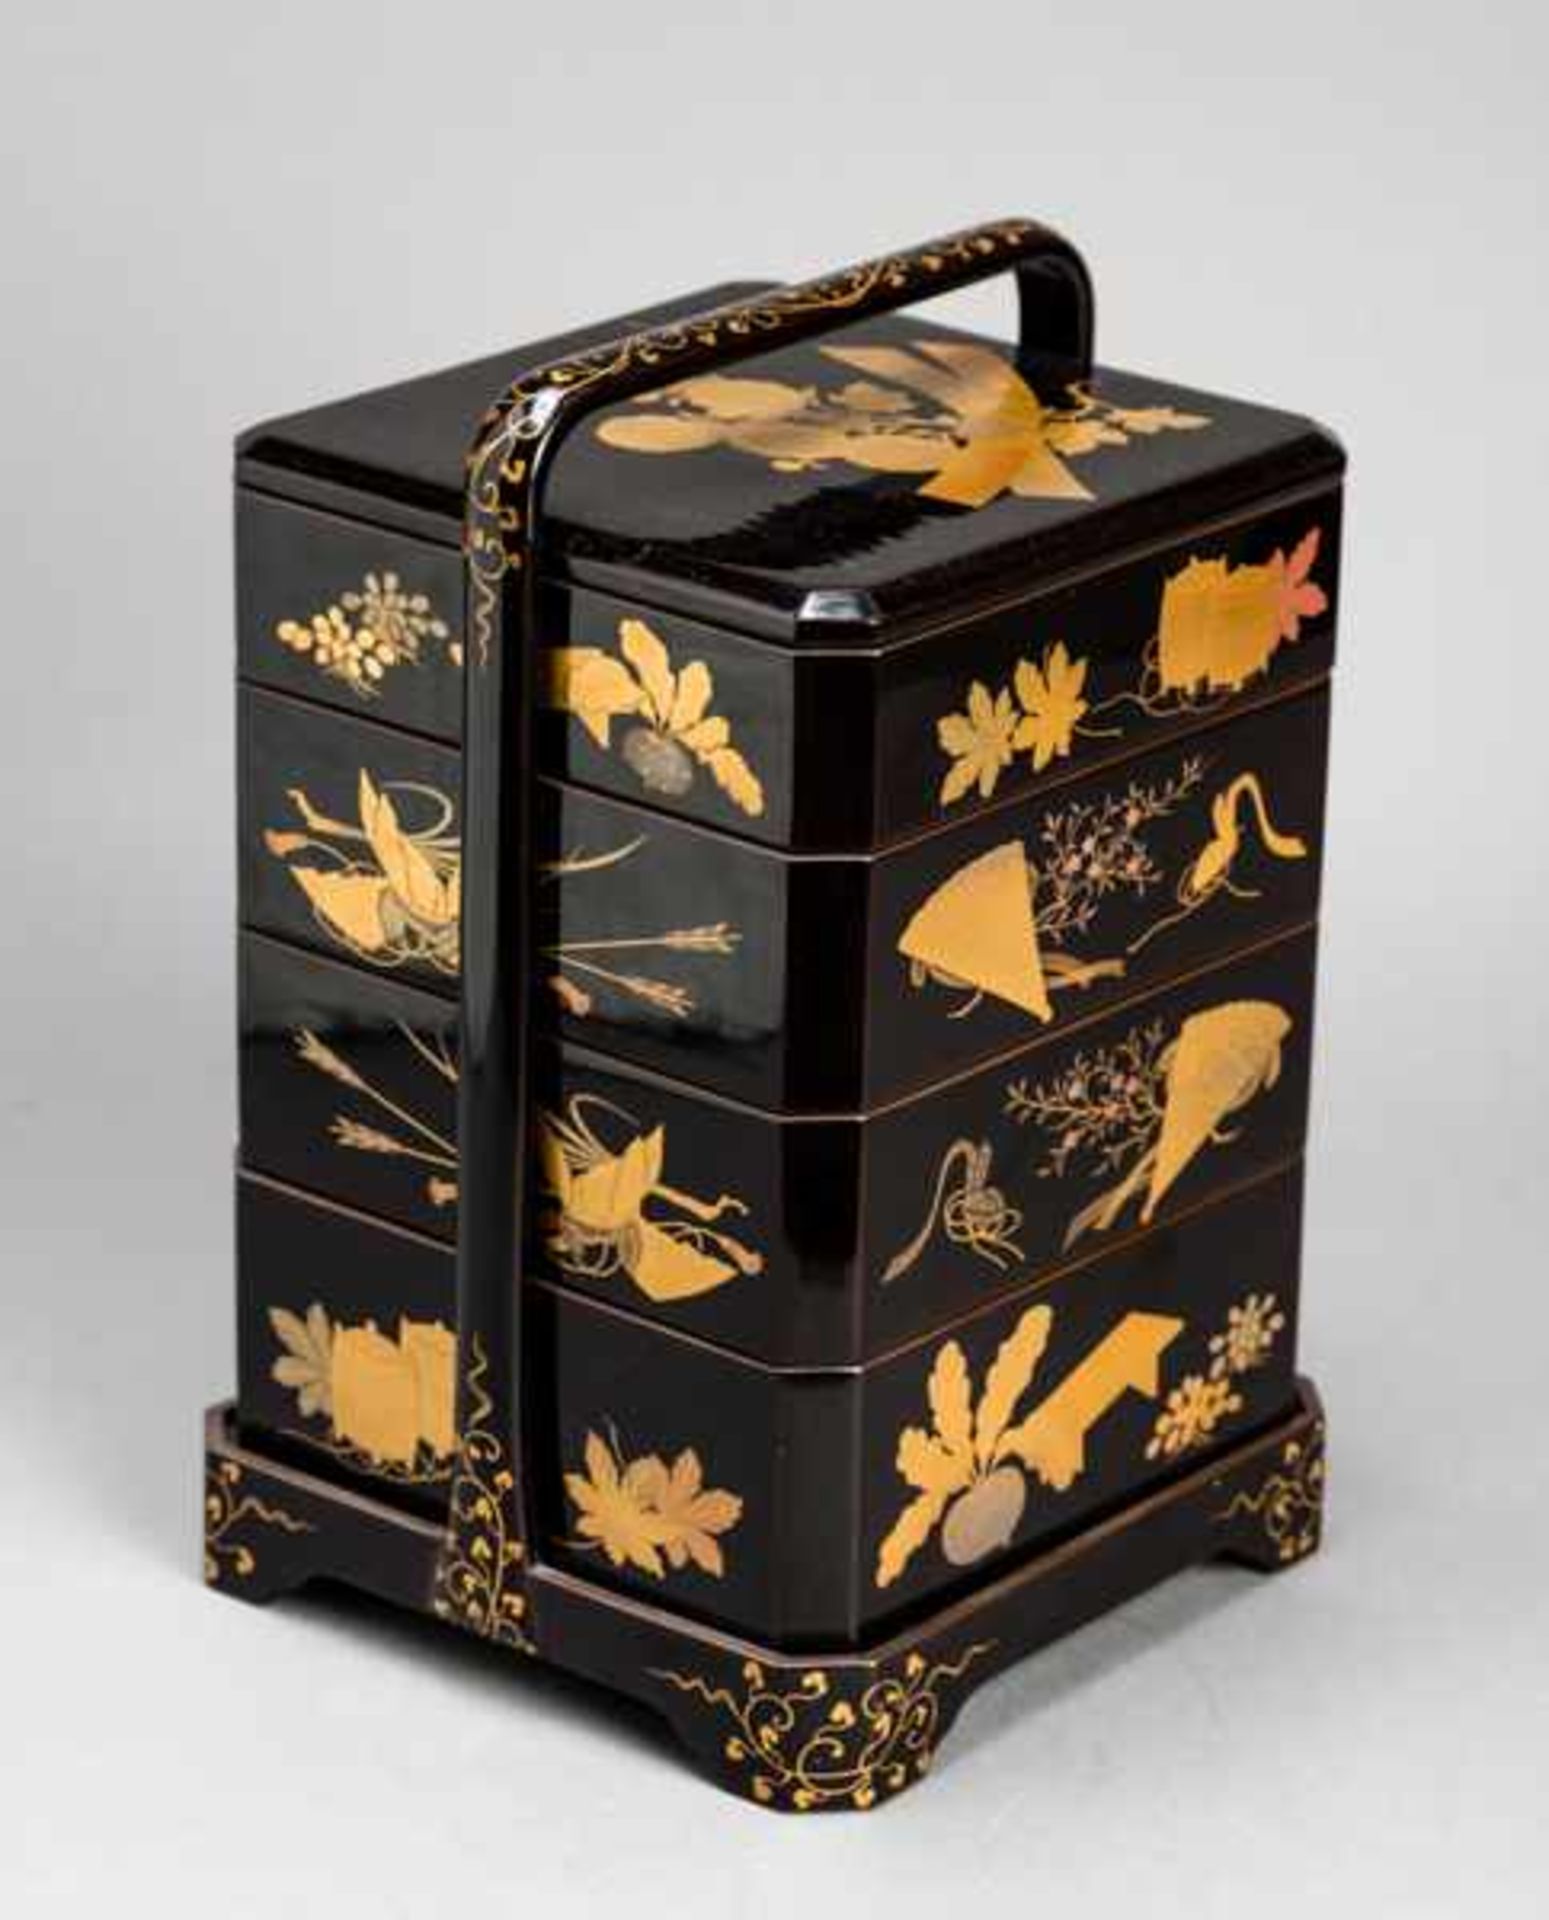 A BLACK LACQUER FOUR-TIER JUBAKO (CAKE BOX) AND COVER WITH A PORTABLE CASE Wood and lacquer.